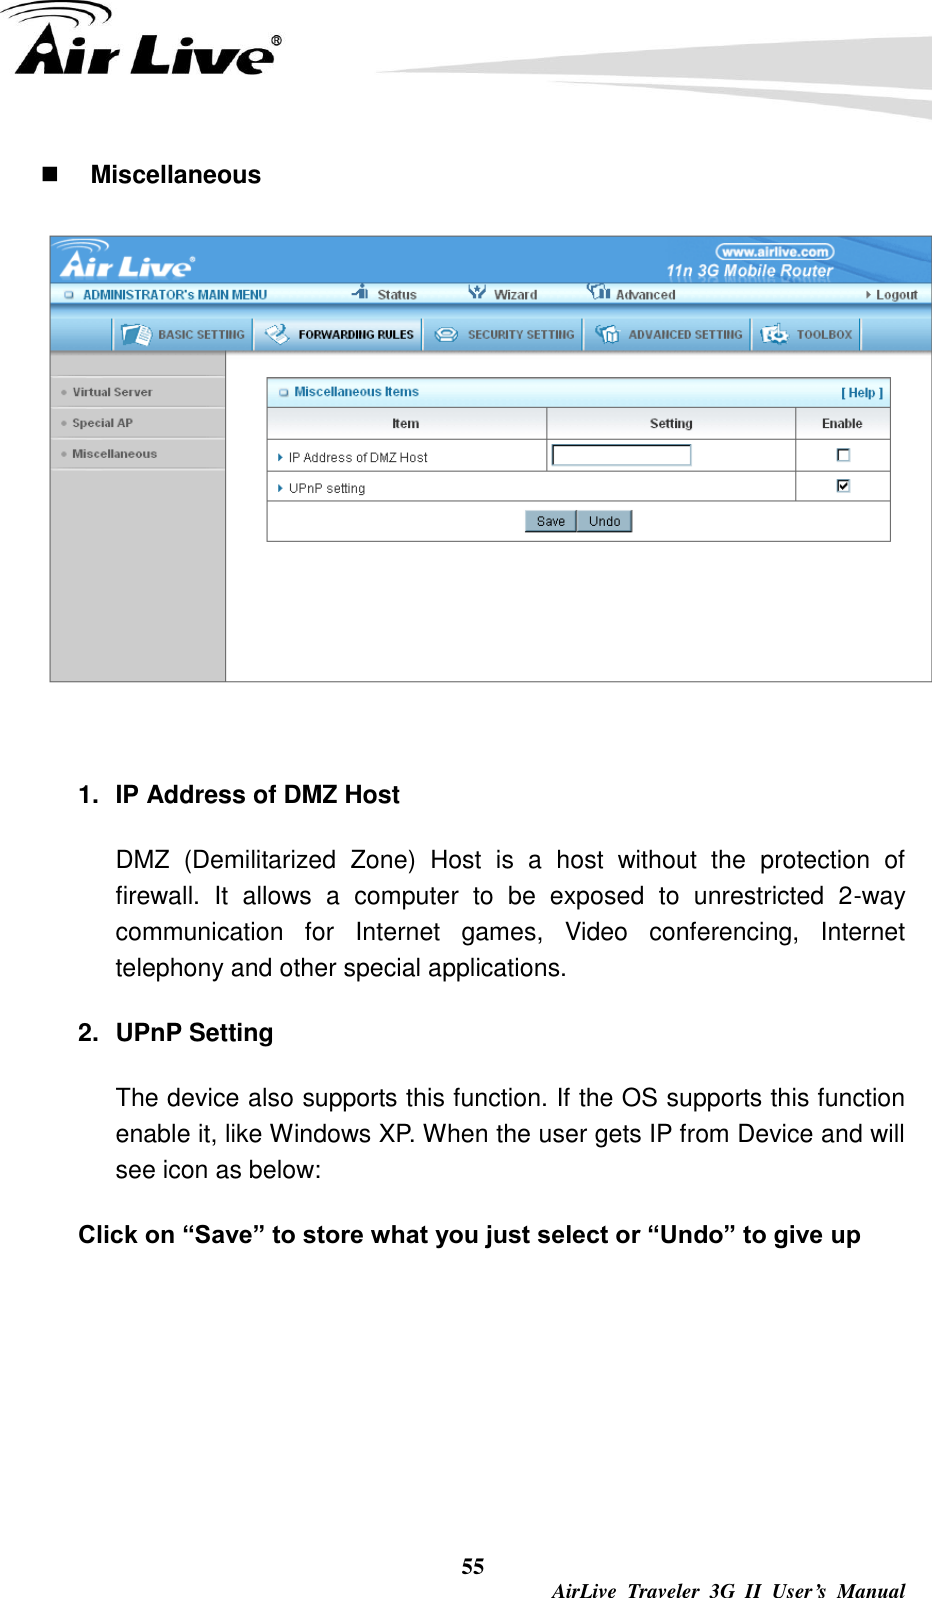  55  AirLive  Traveler  3G  II  User’s  Manual  Miscellaneous  1.  IP Address of DMZ Host DMZ  (Demilitarized  Zone)  Host  is  a  host  without  the  protection  of firewall.  It  allows  a  computer  to  be  exposed  to  unrestricted  2-way communication  for  Internet  games,  Video  conferencing,  Internet telephony and other special applications.   2.  UPnP Setting   The device also supports this function. If the OS supports this function enable it, like Windows XP. When the user gets IP from Device and will see icon as below:   Click on “Save” to store what you just select or “Undo” to give up 